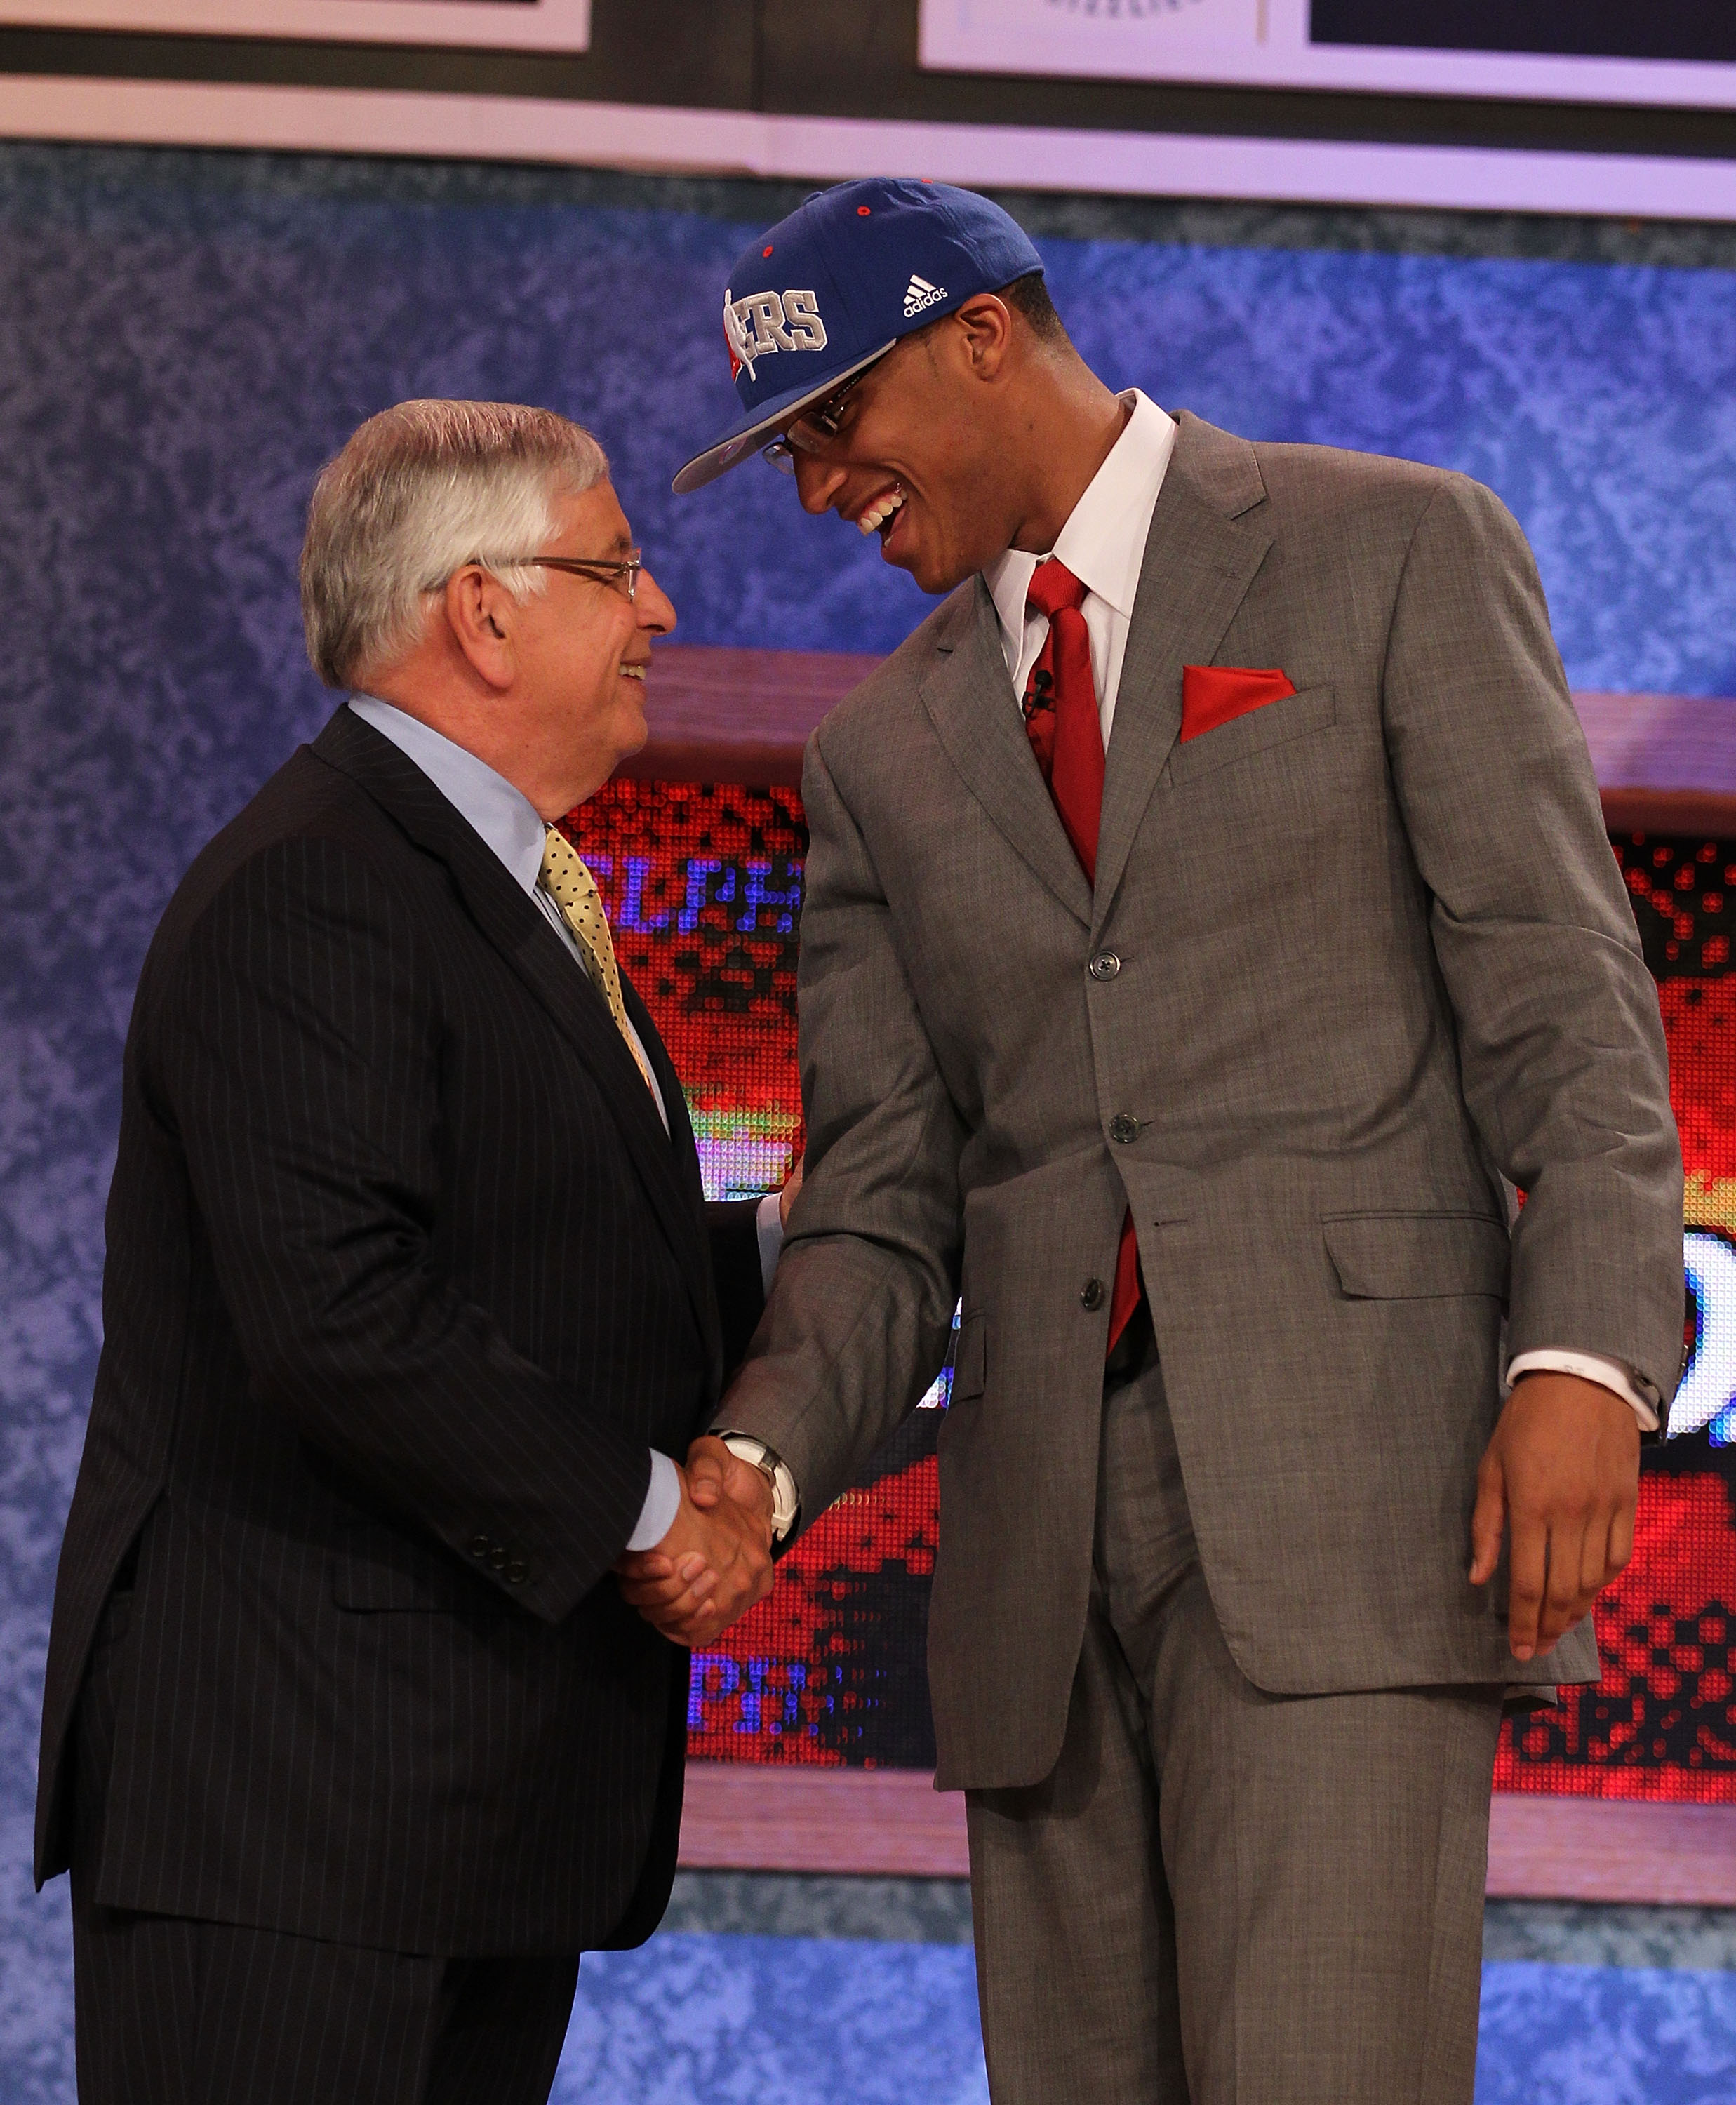 NEW YORK - JUNE 24:  Evan Turner of Ohio State stands with NBA Commisioner David Stern after being drafted second overall by  the Philadelphia 76ers at Madison Square Garden on June 24, 2010 in New York City.  NOTE TO USER: User expressly acknowledges and